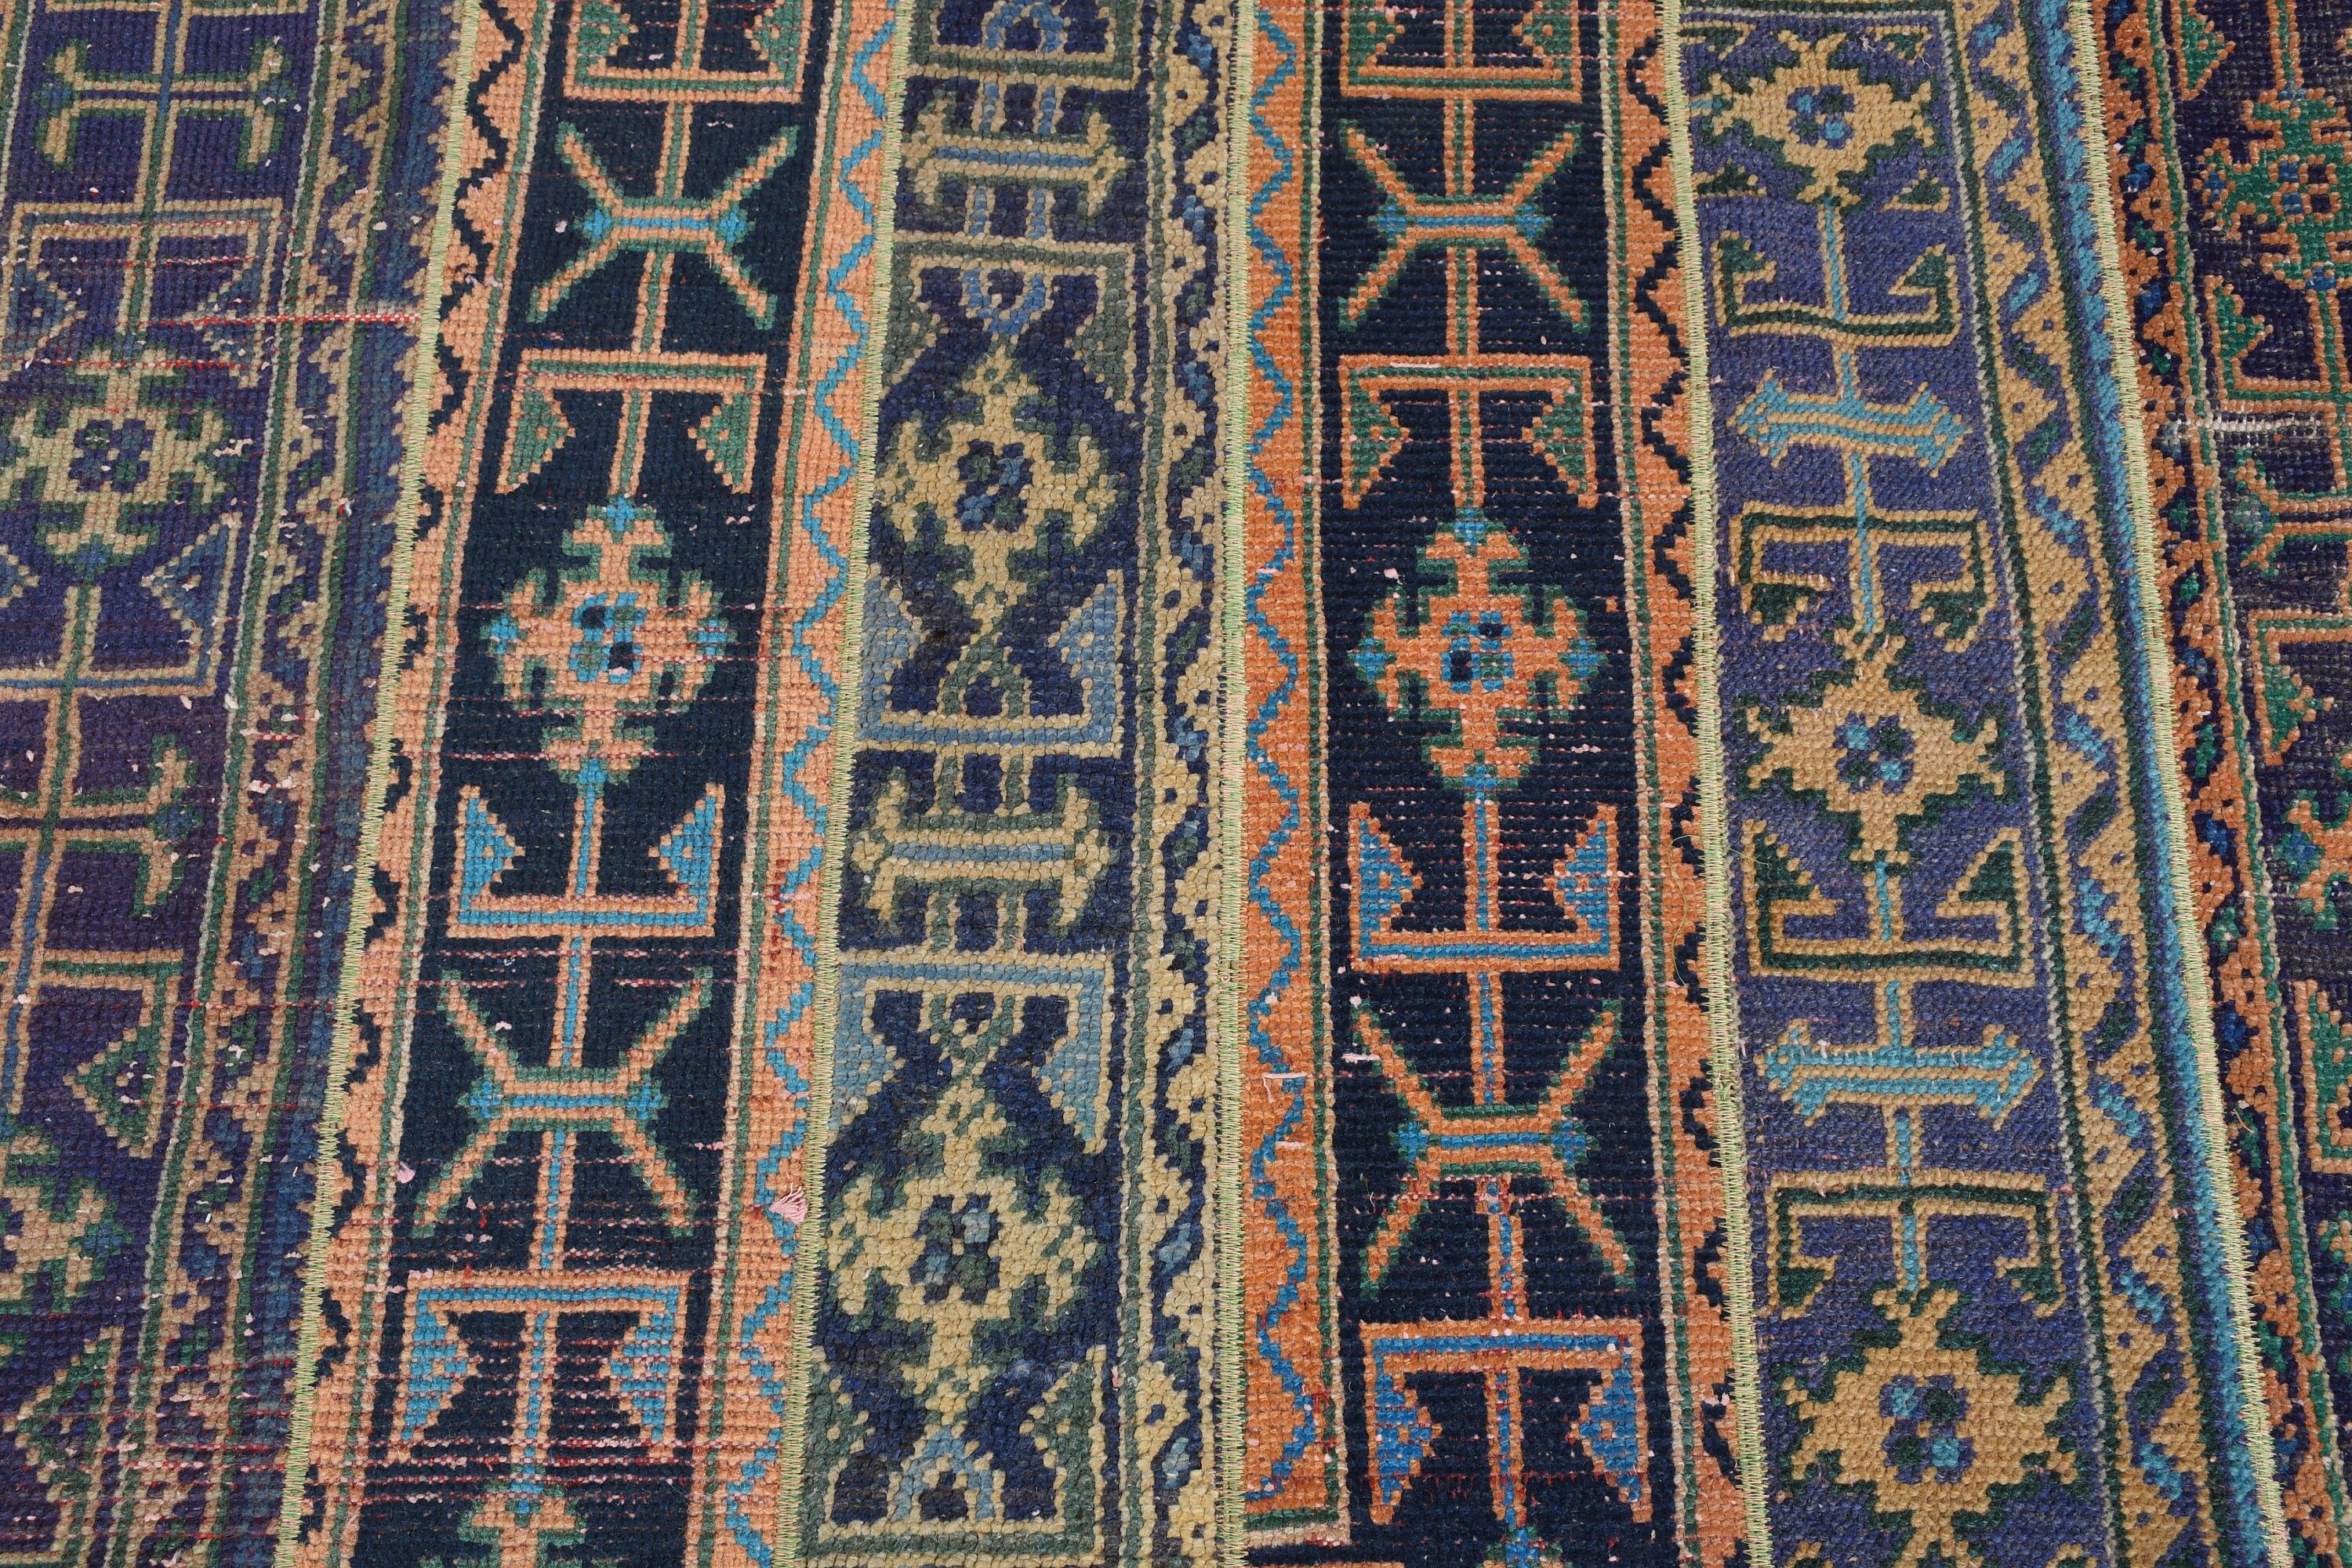 Bedroom Rug, Rugs for Kitchen, Antique Rugs, Turkish Rugs, Blue Home Decor Rugs, Entry Rug, Vintage Rug, 3x7 ft Accent Rug